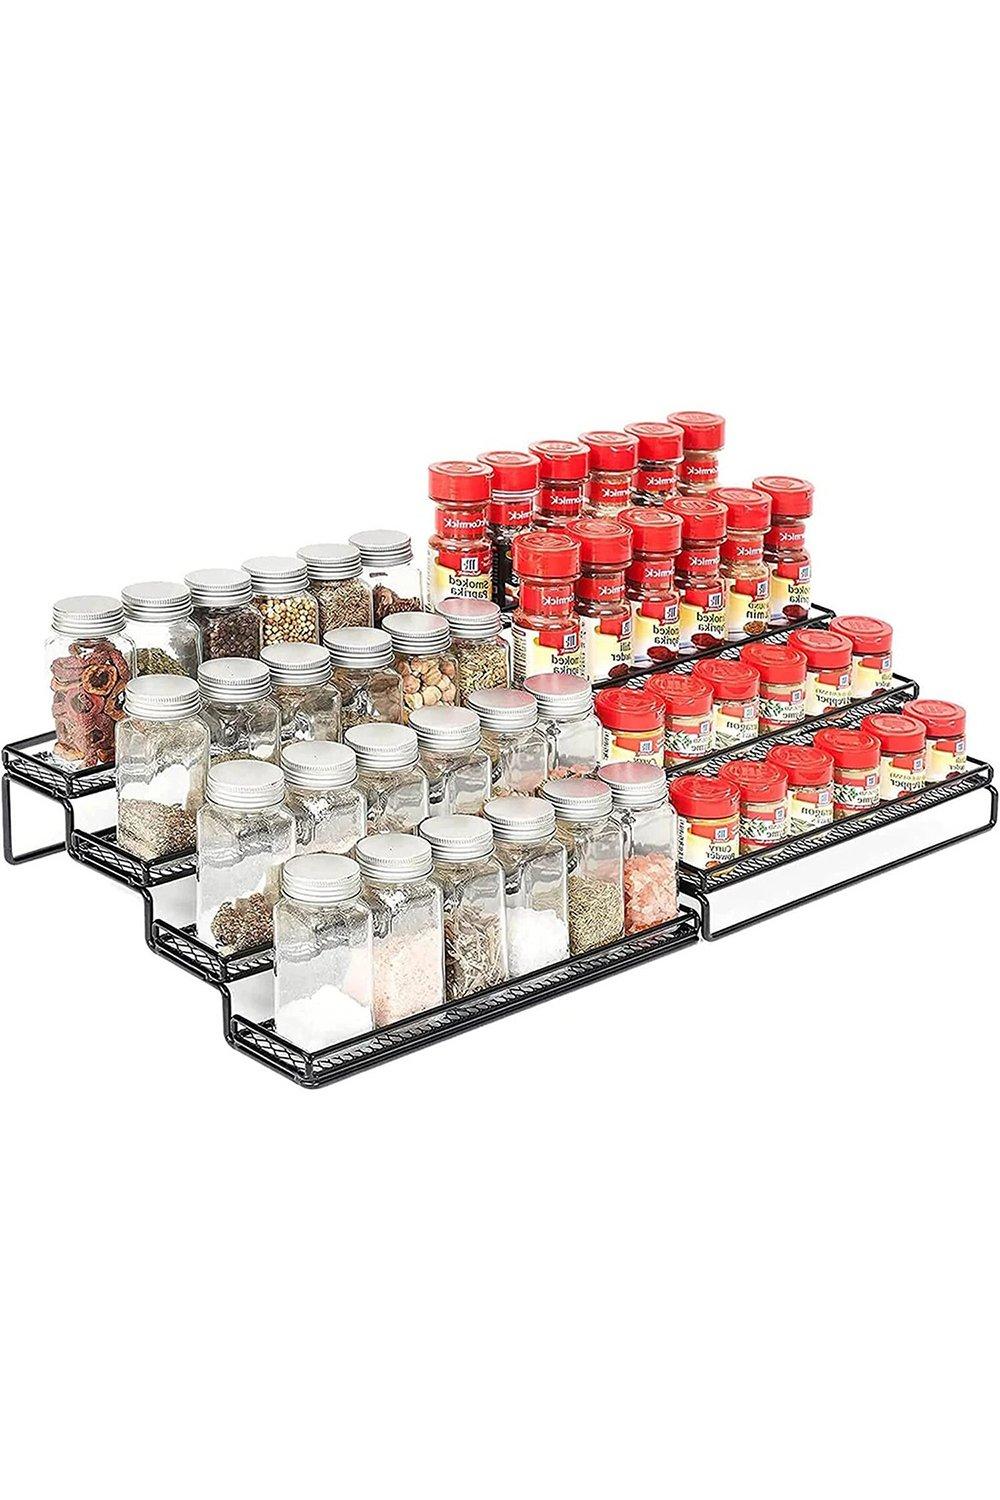 4 Tier Kitchen Expandable Spice Rack Cupboard Organiser Storage Holder For Cabinet